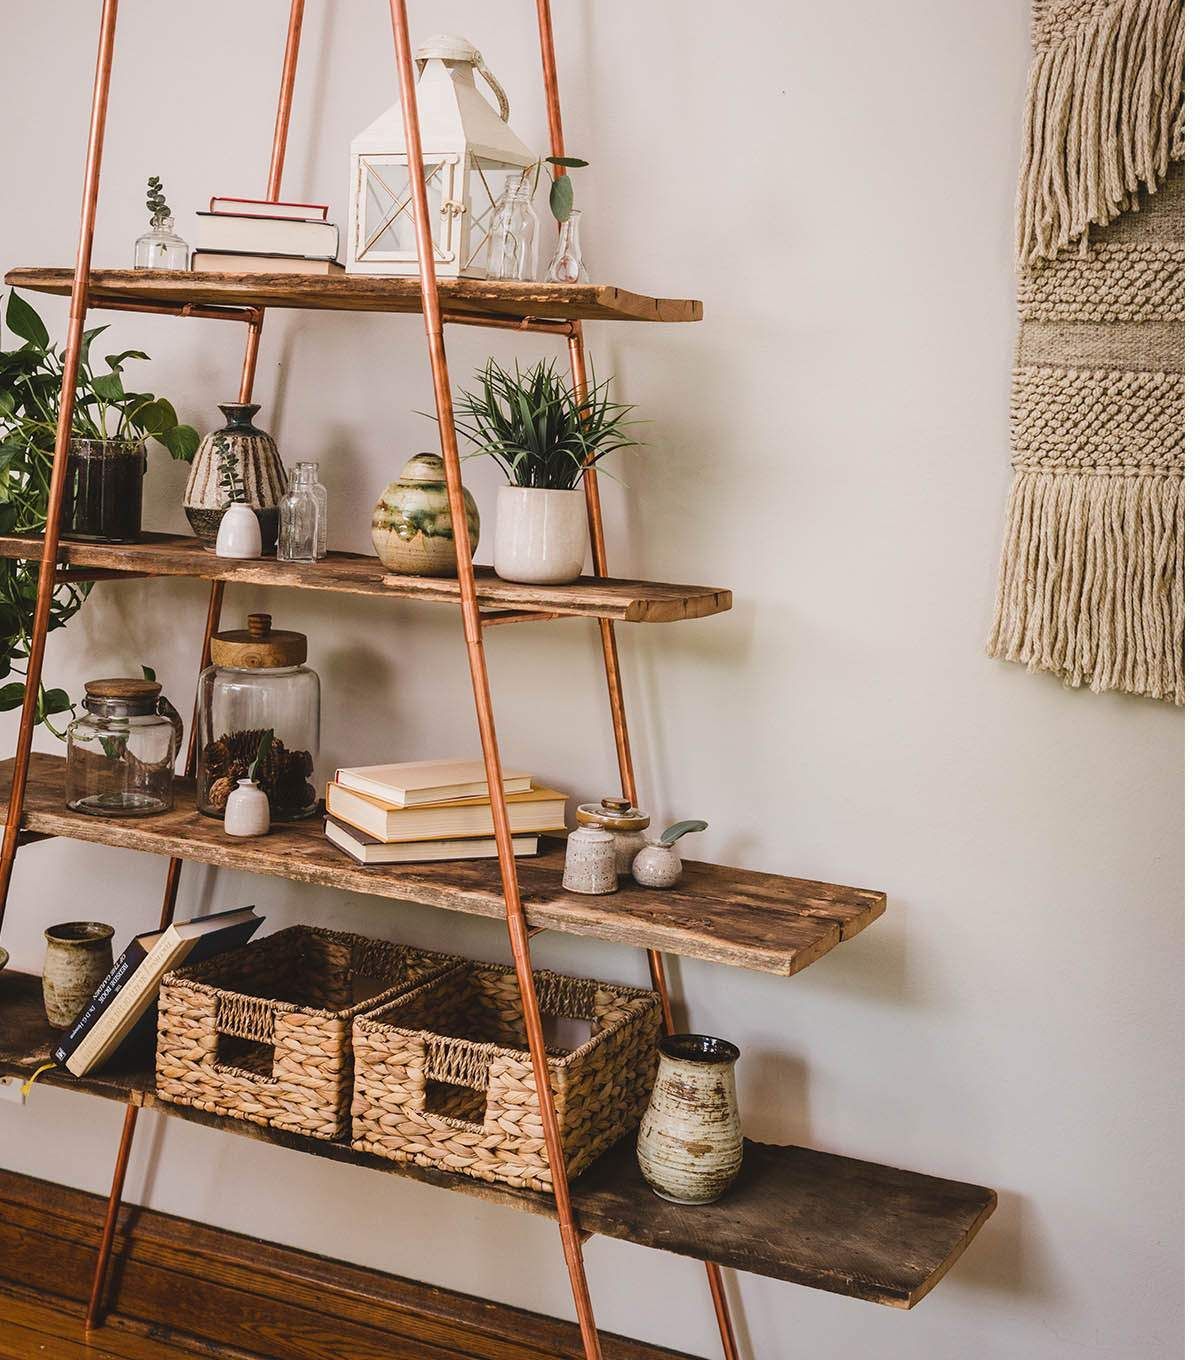 How To Make A Ladder Shelving Unit | JOANN - How To Make A Ladder Shelving Unit | JOANN -   16 diy Shelves boho ideas